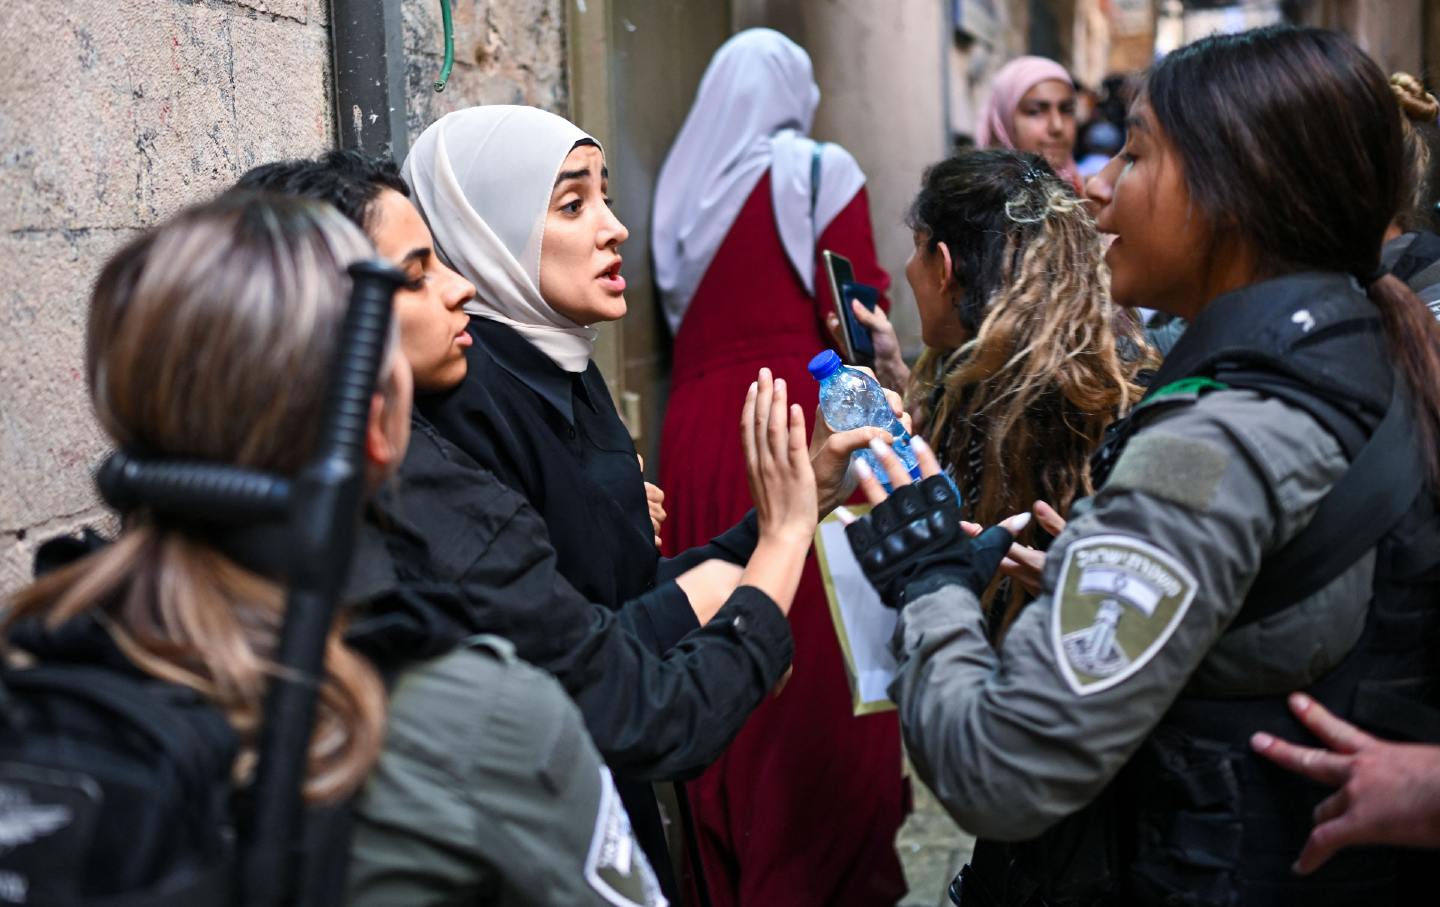 Palestinian women are stopped by members of the Israeli security forces in the old city of Jerusalem as they arrive for the Friday noon prayer on October 13, 2023.